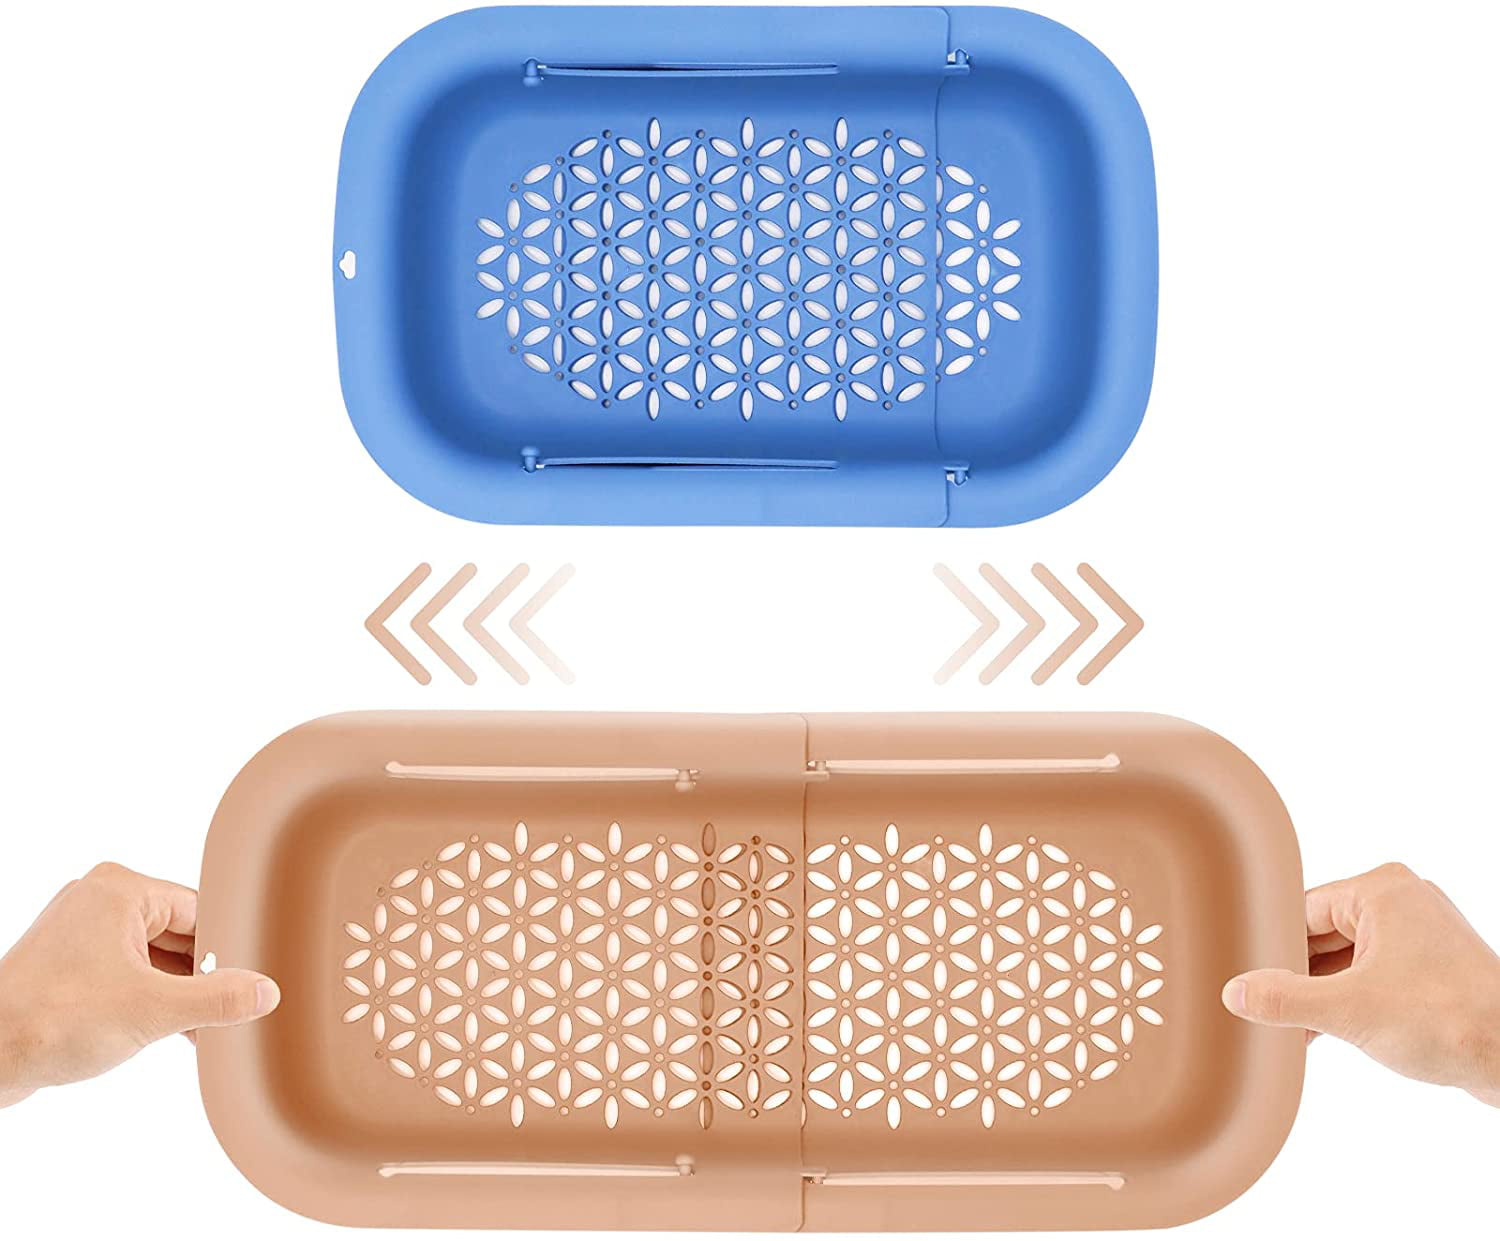 Collapsible Colander Strainer Set for Kitchen Blue and Silver, 2 Pack